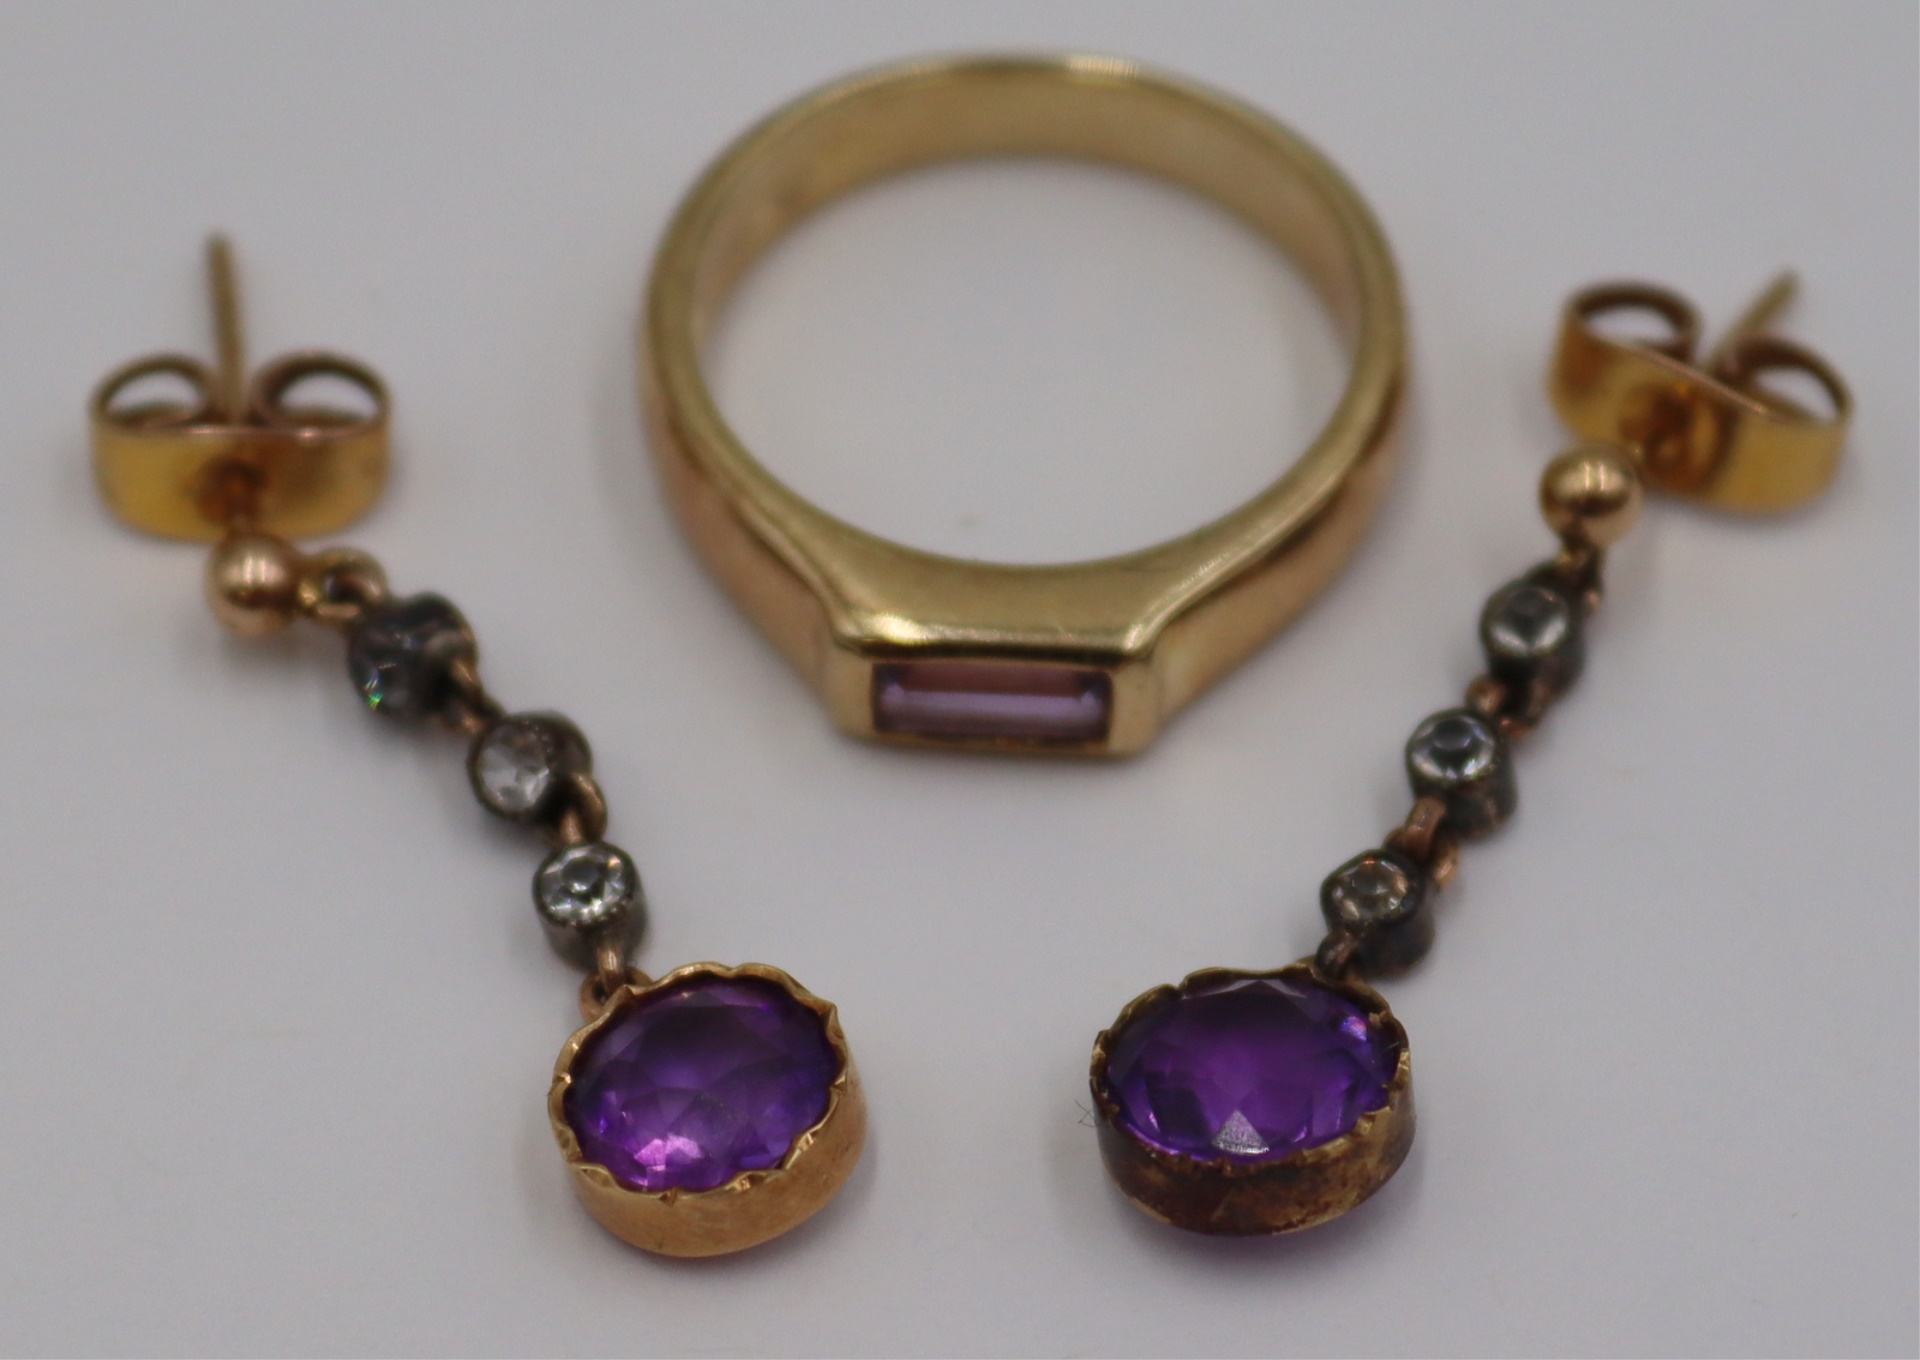 JEWELRY. ASSORTED AMETHYST AND